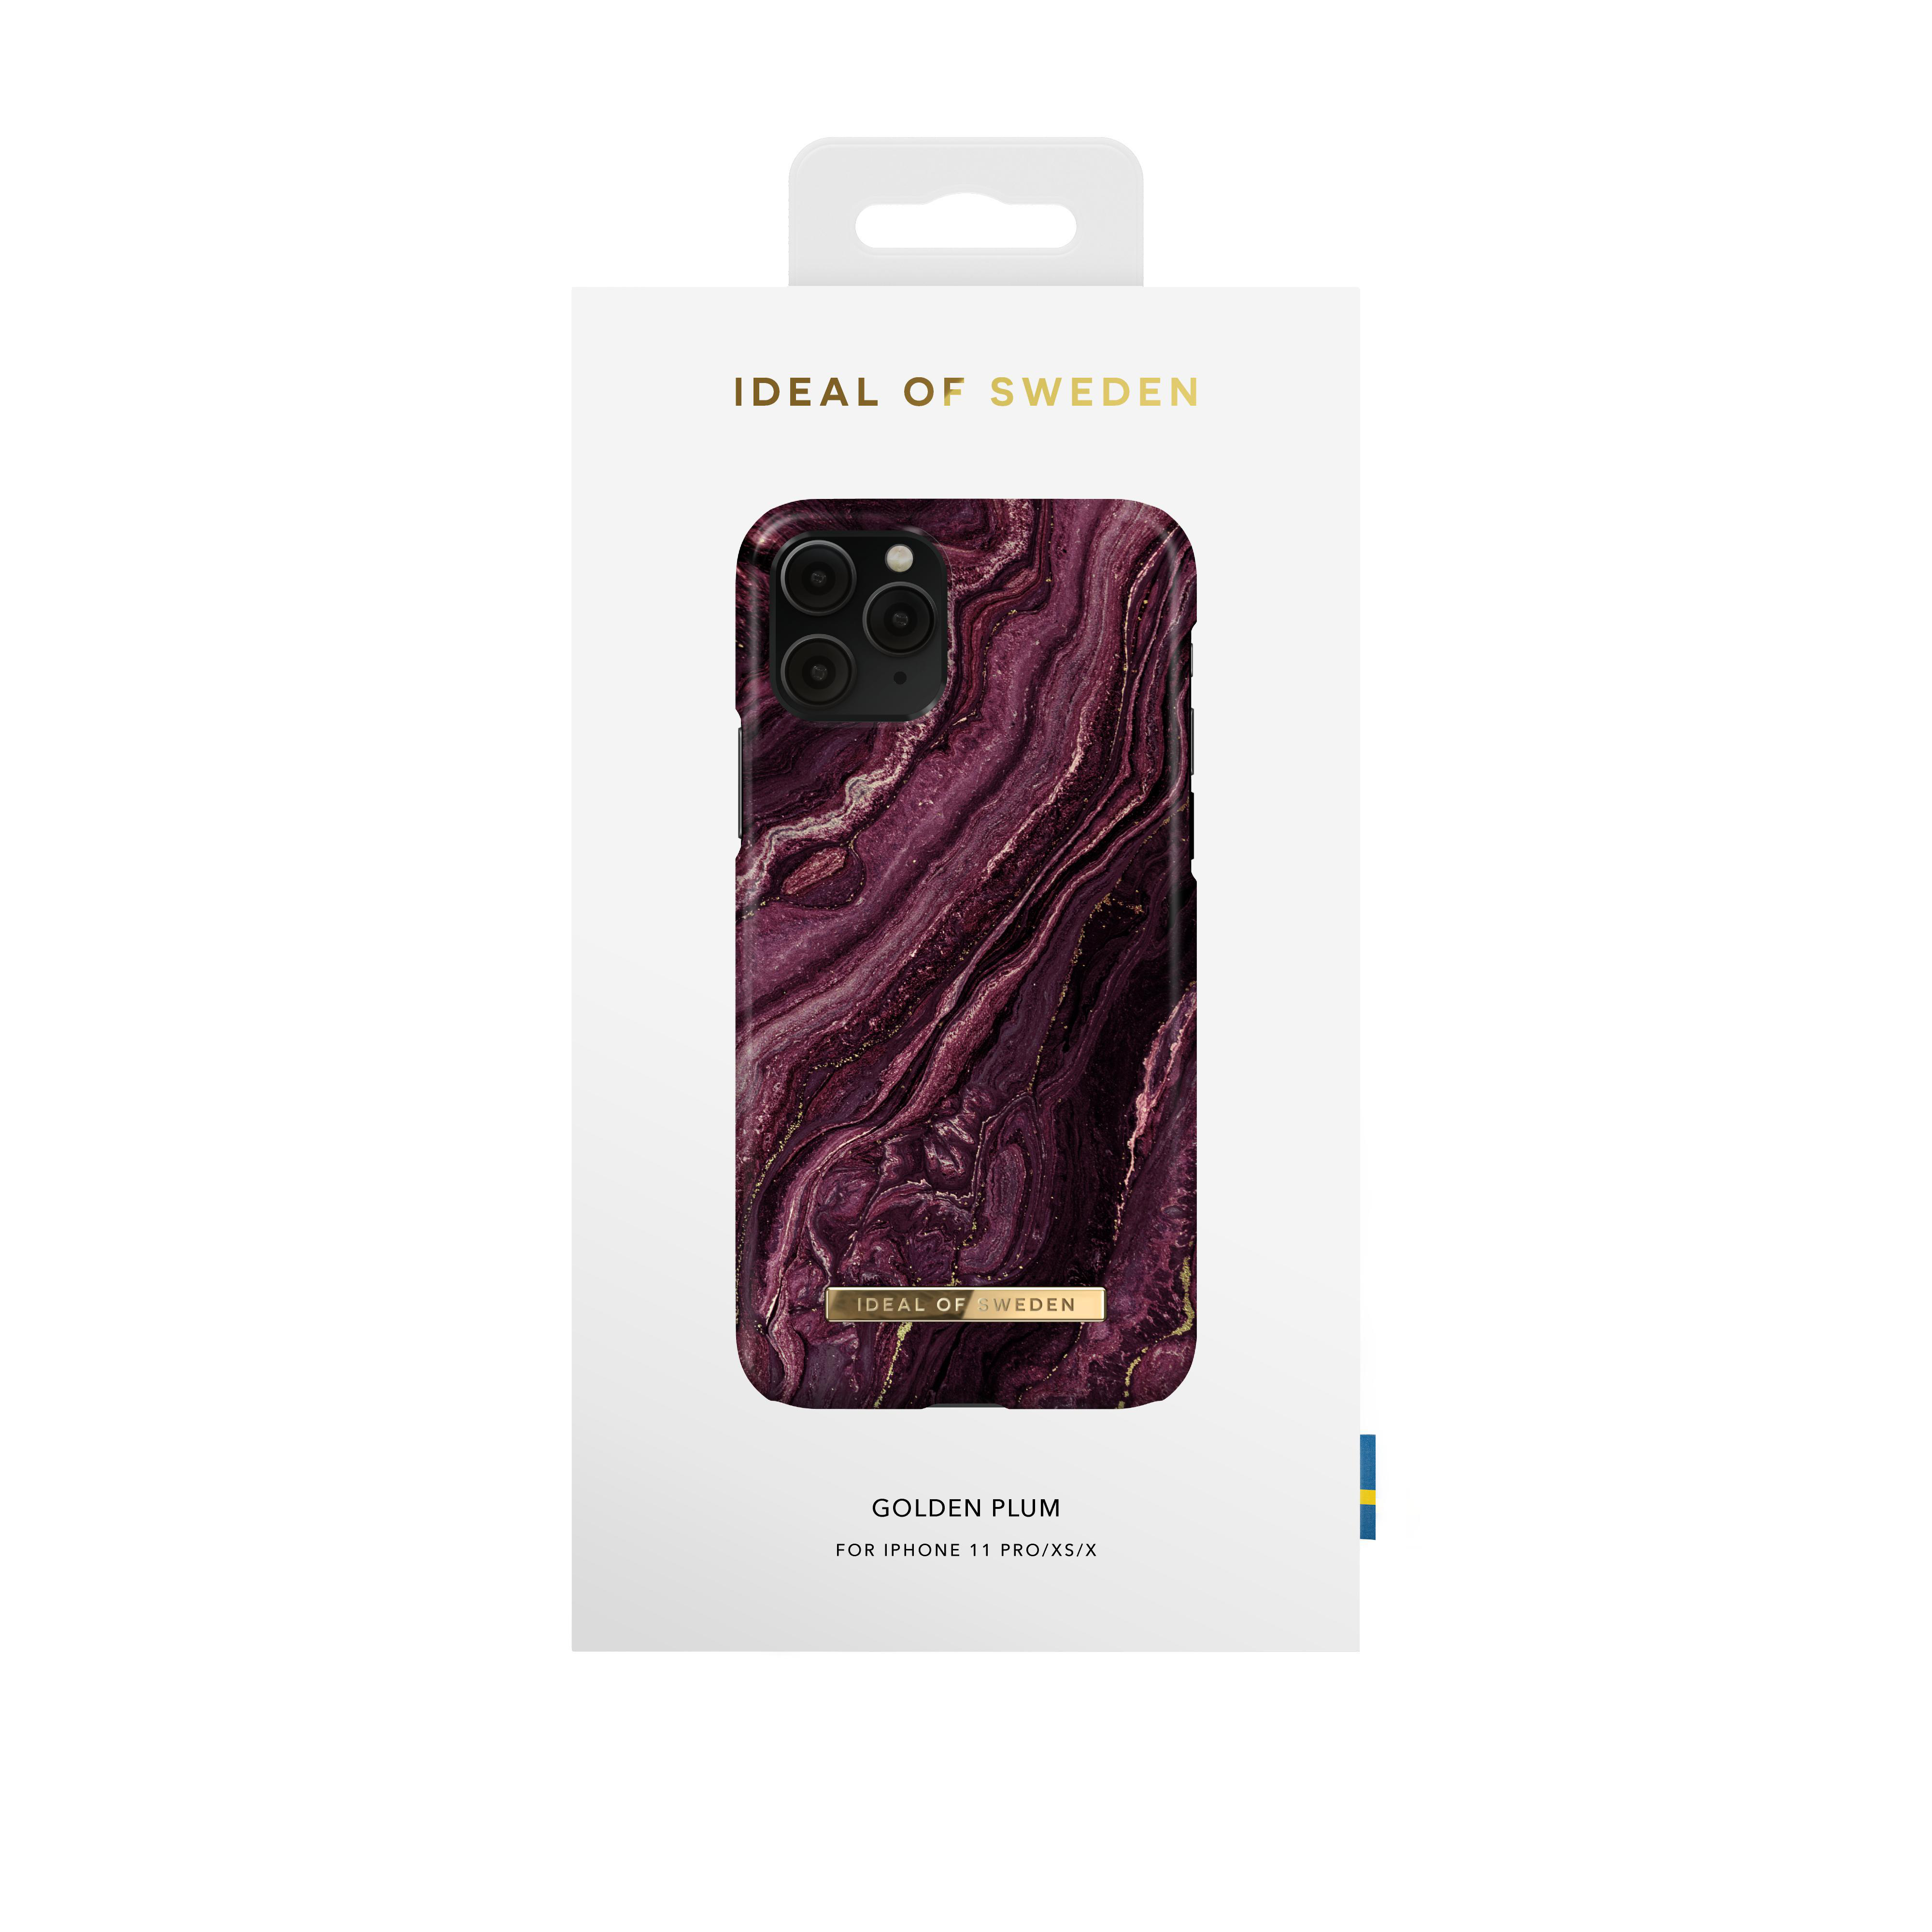 iPhone IDEAL X, OF Backcover, XS, Apple, SWEDEN Purple iPhone iPhone 11 Pro, Fashion,